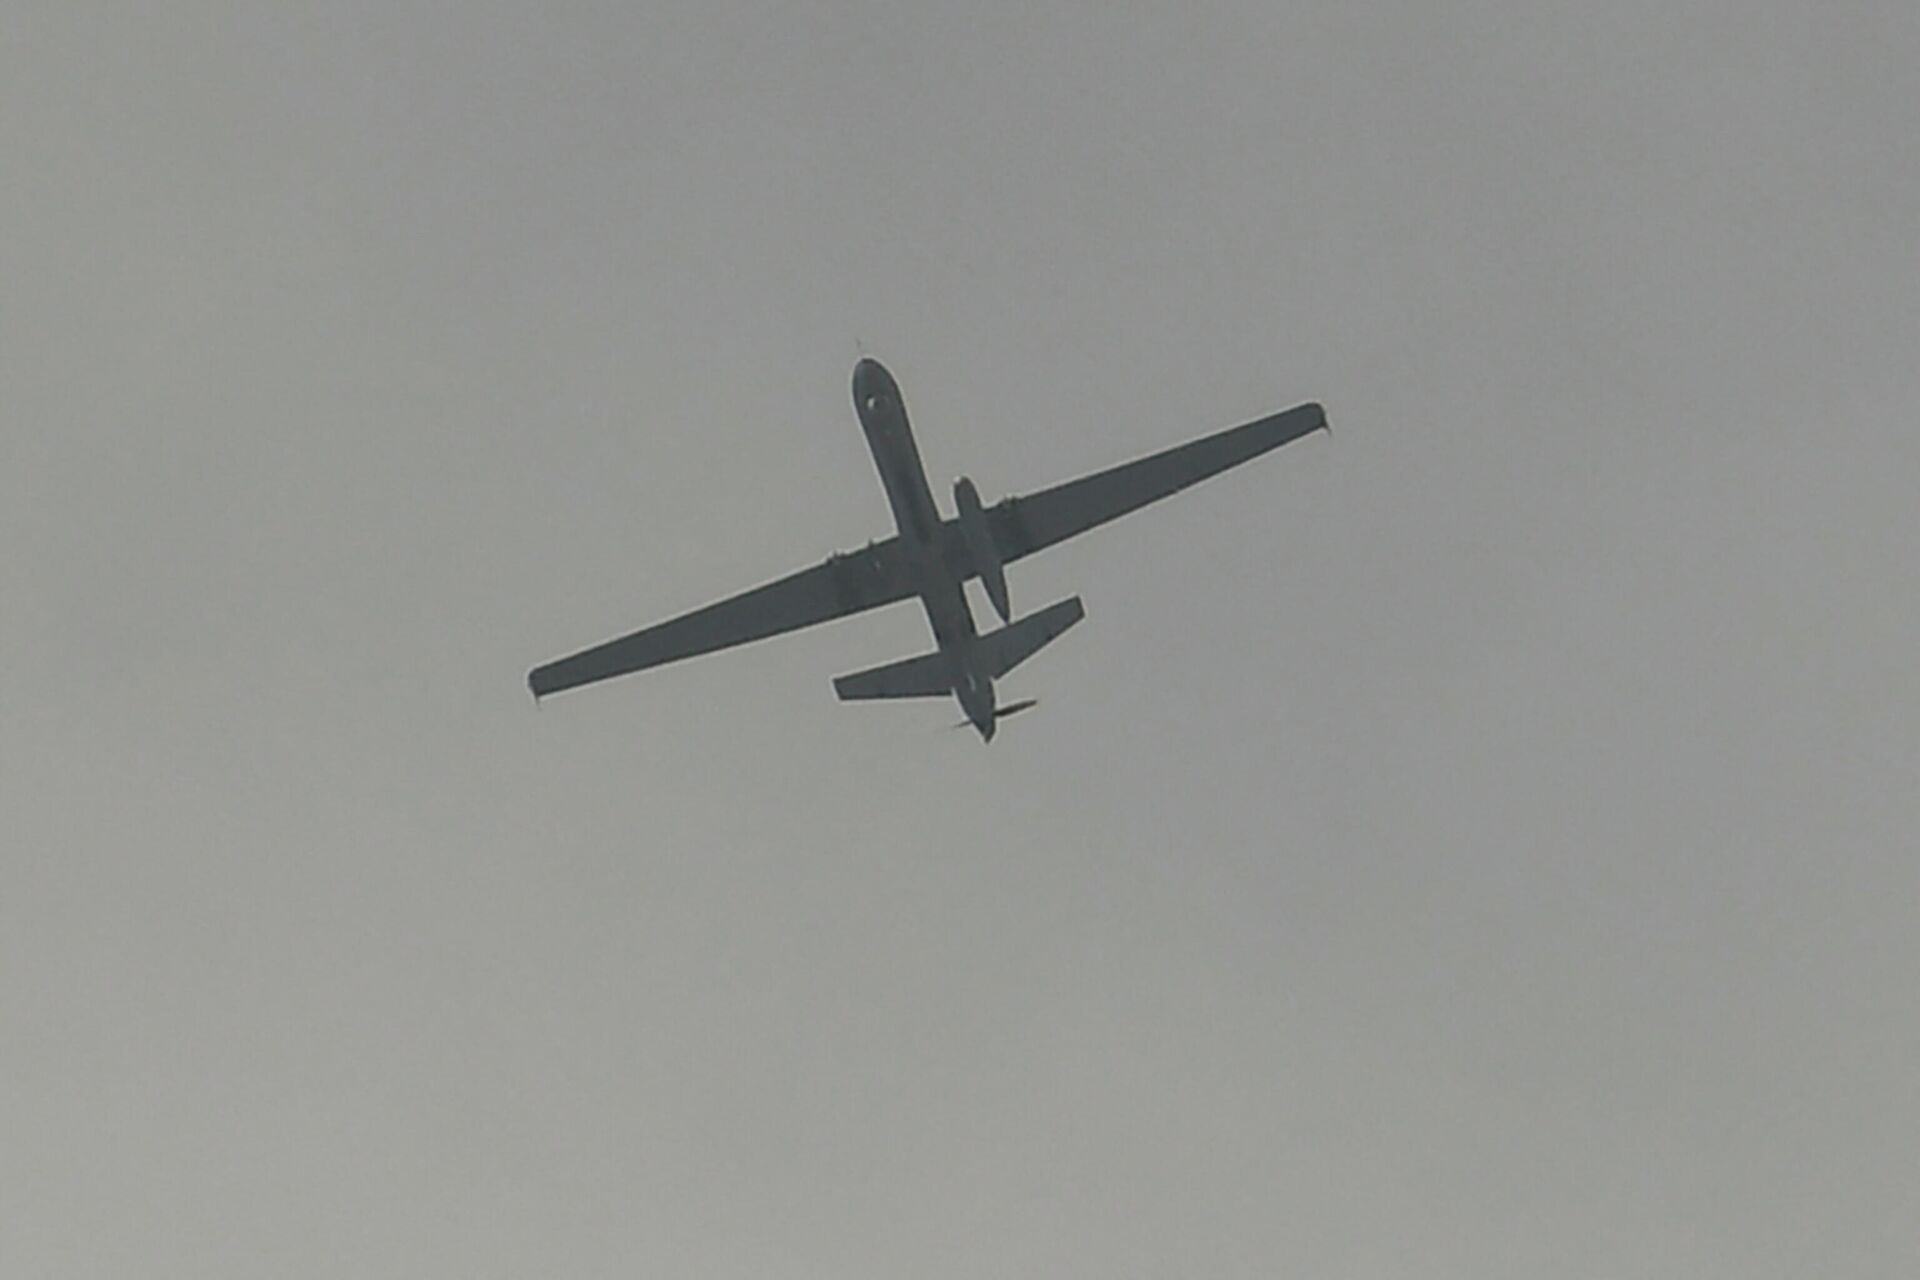 A drone flies over the airport in Kabul on August 31, 2021. - The US military announced it has completed its withdrawal from Afghanistan after a brutal 20-year war -- one that started and ended with the hardline Islamist Taliban in power, despite billions of dollars spent trying to rebuild the conflict-wracked country. - Sputnik International, 1920, 23.10.2021